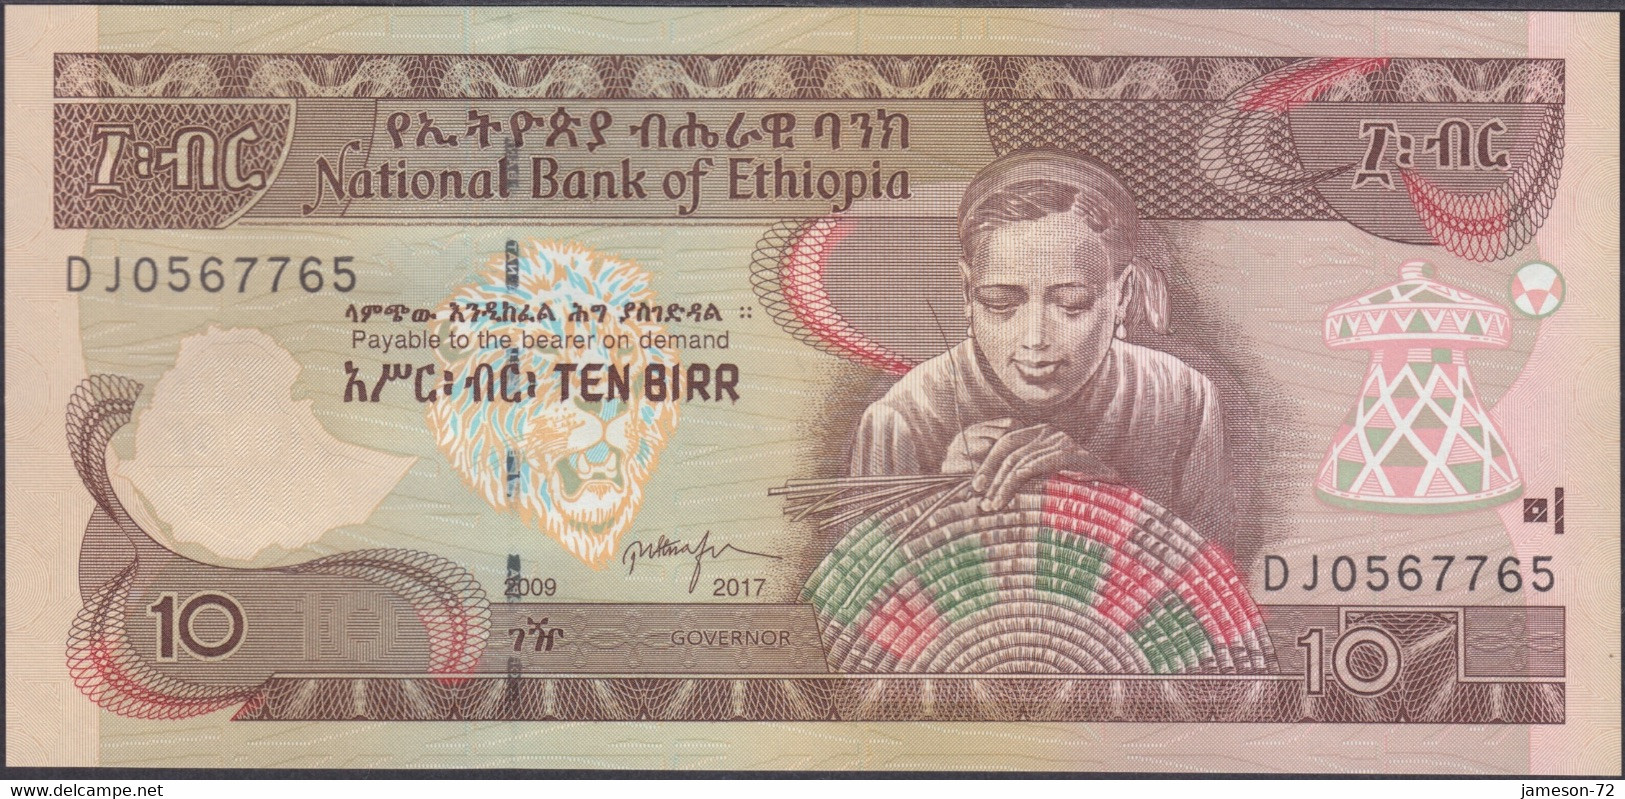 ETHIOPIA - 10 Birr EE2009 2017AD P# 48h Africa Banknote - Edelweiss Coins - Ethiopia